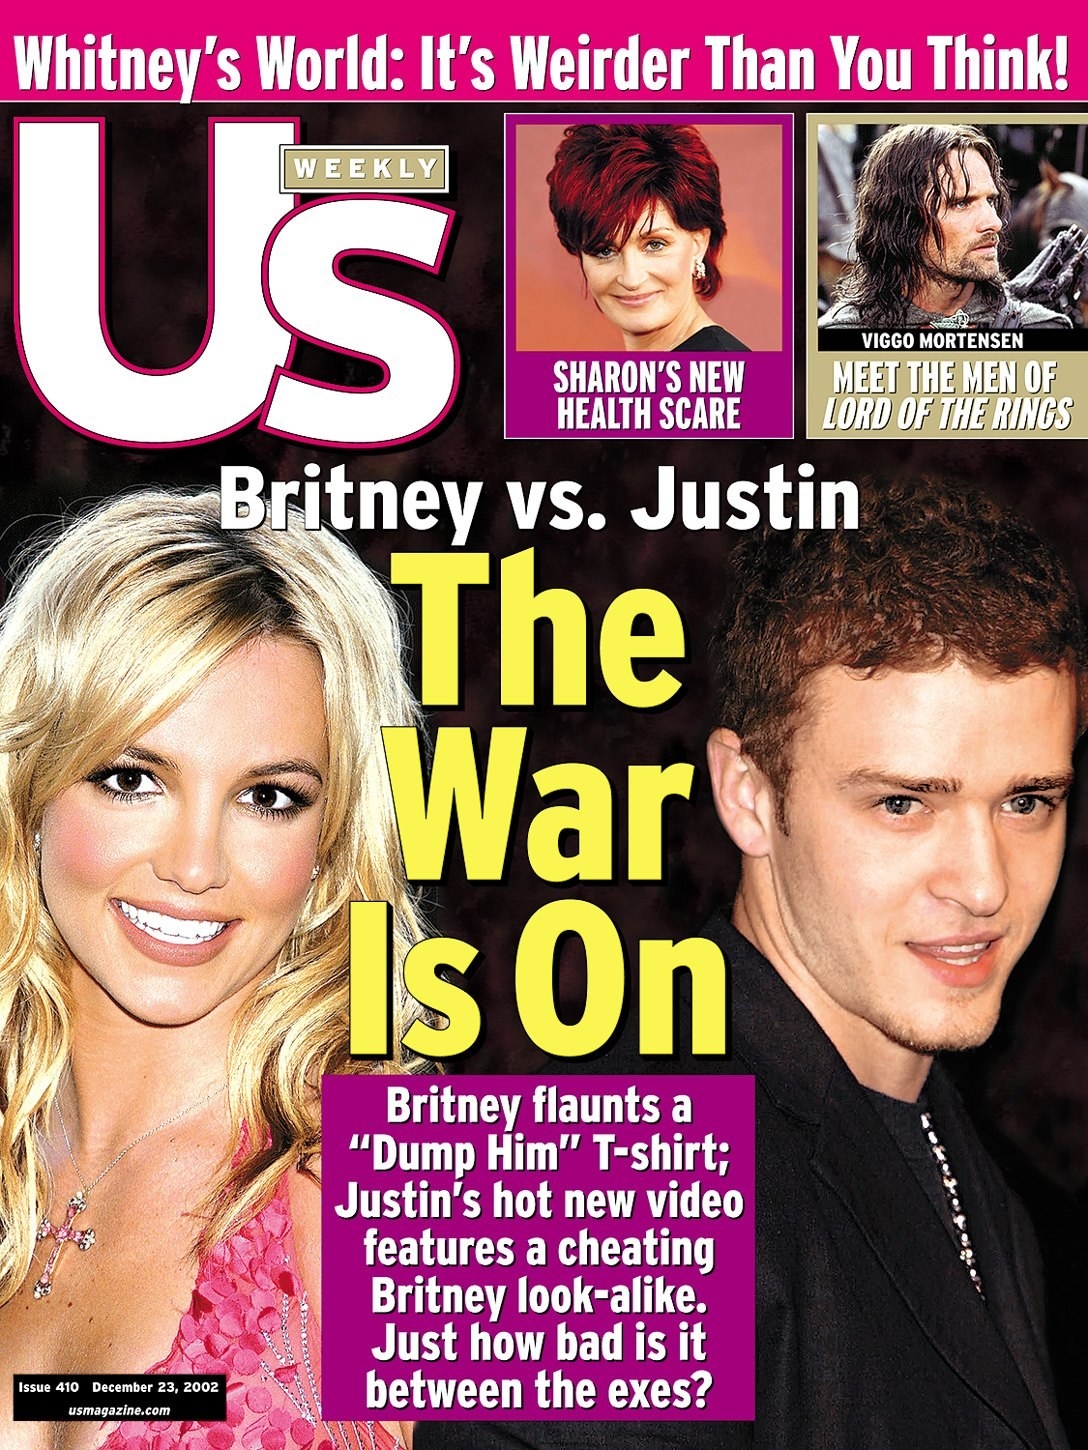 us magazine cover of britney spears and justin timberlake after a break up, the text on the magazine reads the war is on